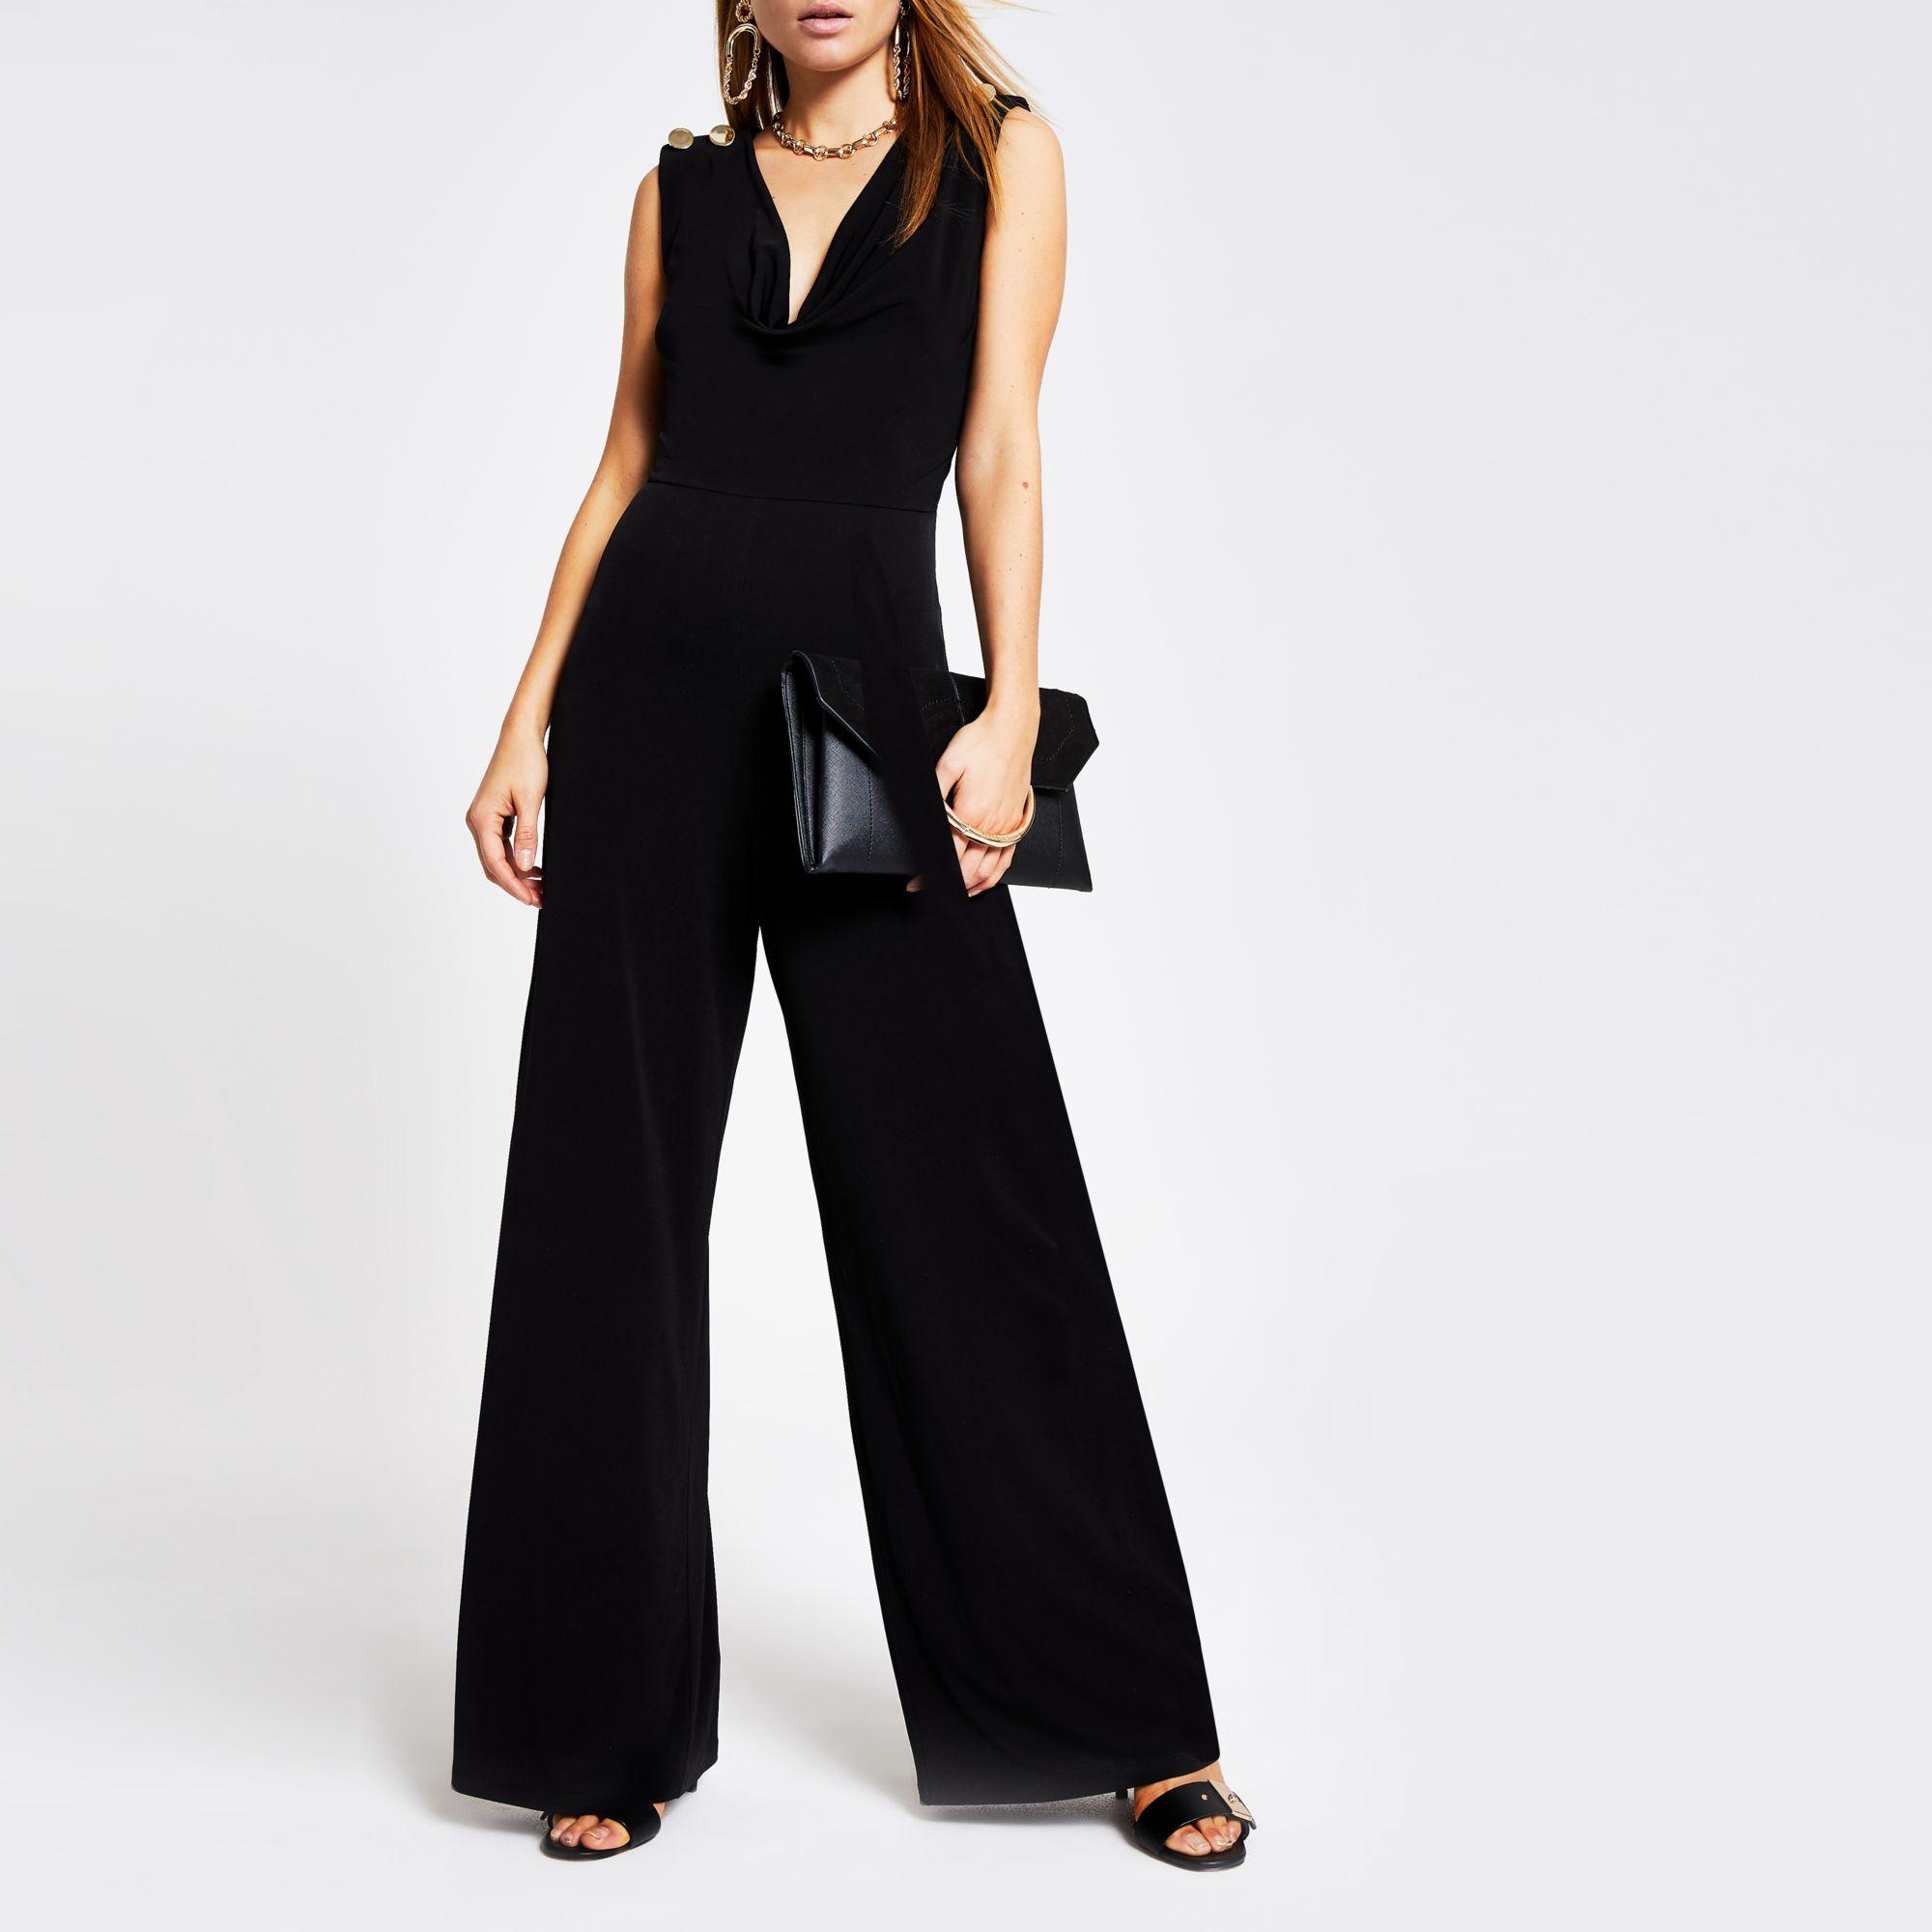 River Island Synthetic Cowl Neck Wide Leg Jumpsuit in Black - Lyst